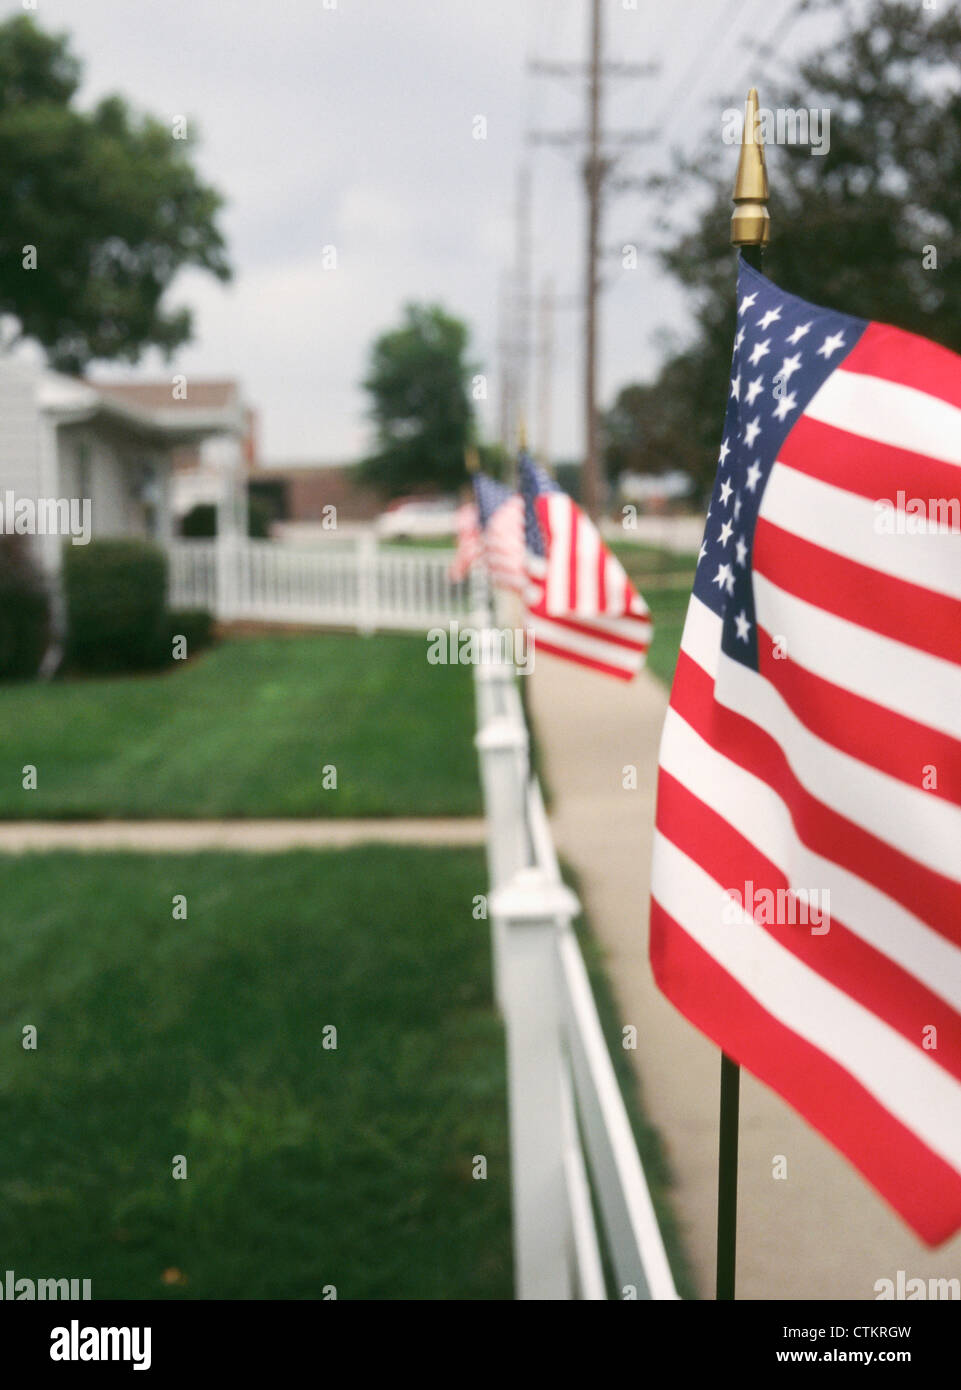 American flags lining the white fences of a middle american neighborhood, in Iowa. Stock Photo